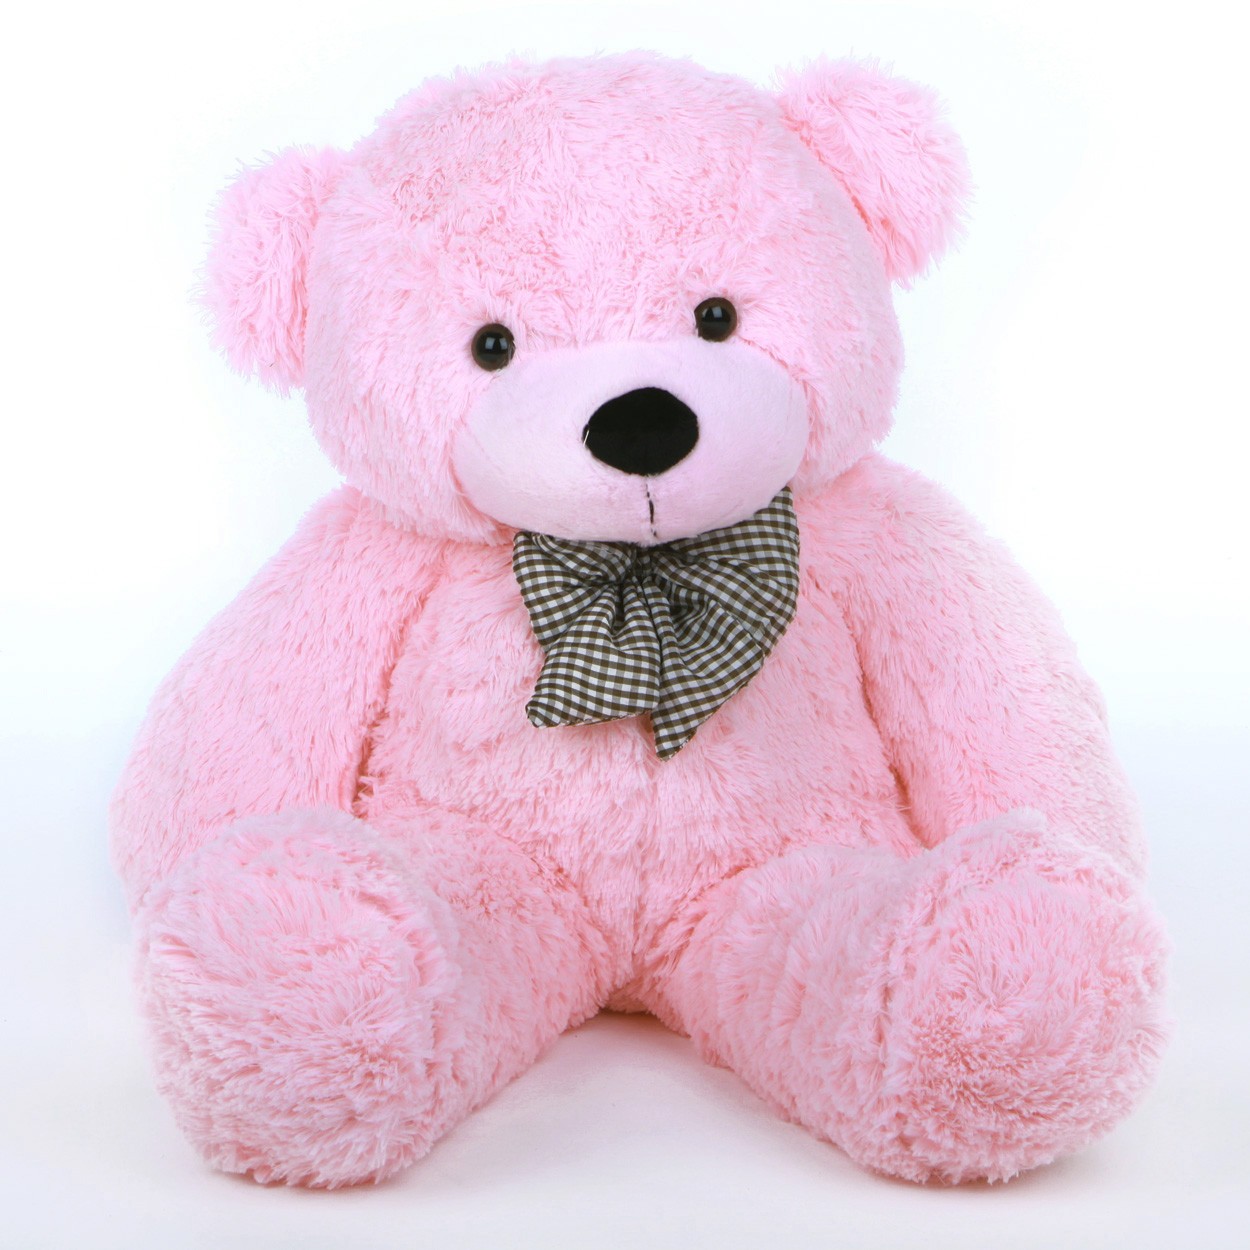 Free download 25 Romantic Teddy Bear Wallpapers [1250x1250] for ...